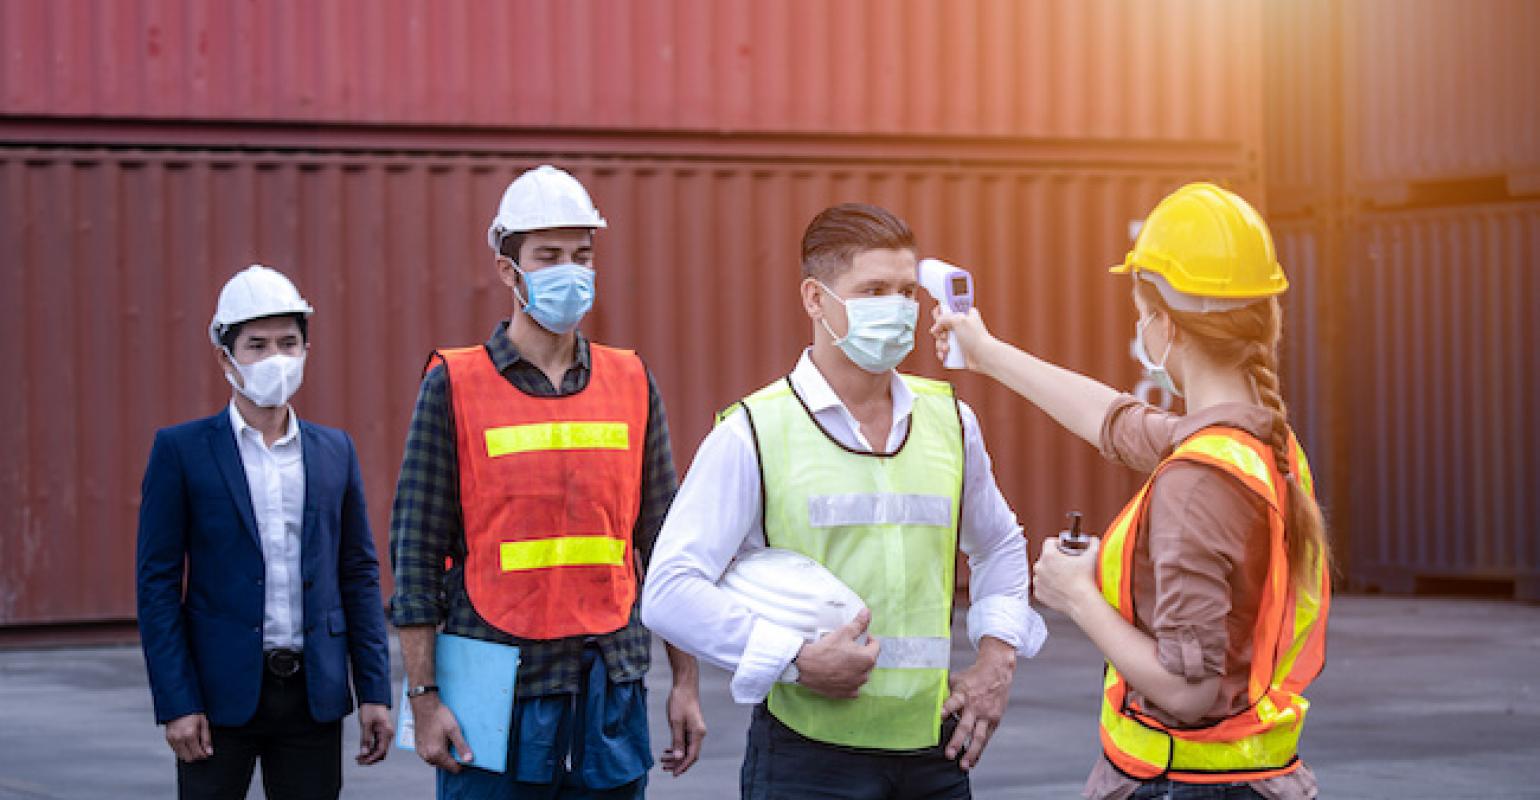 What Do the New OSHA Regulations Mean for Your Business?